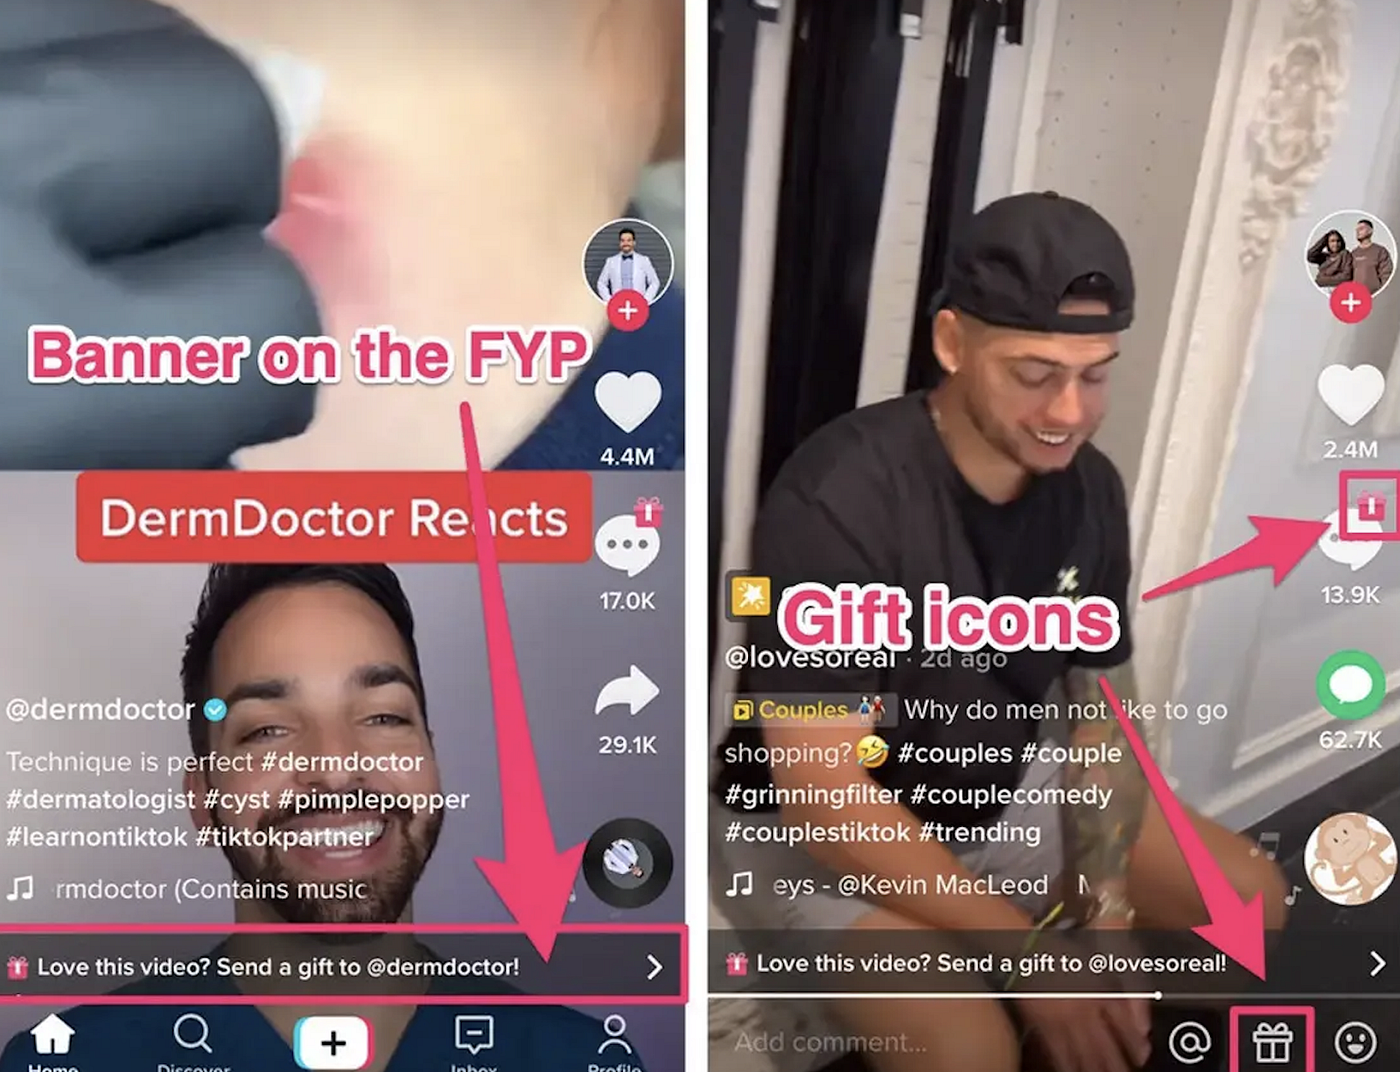 TikTok LIVE Scams: People Use Stolen Footage to Make Money